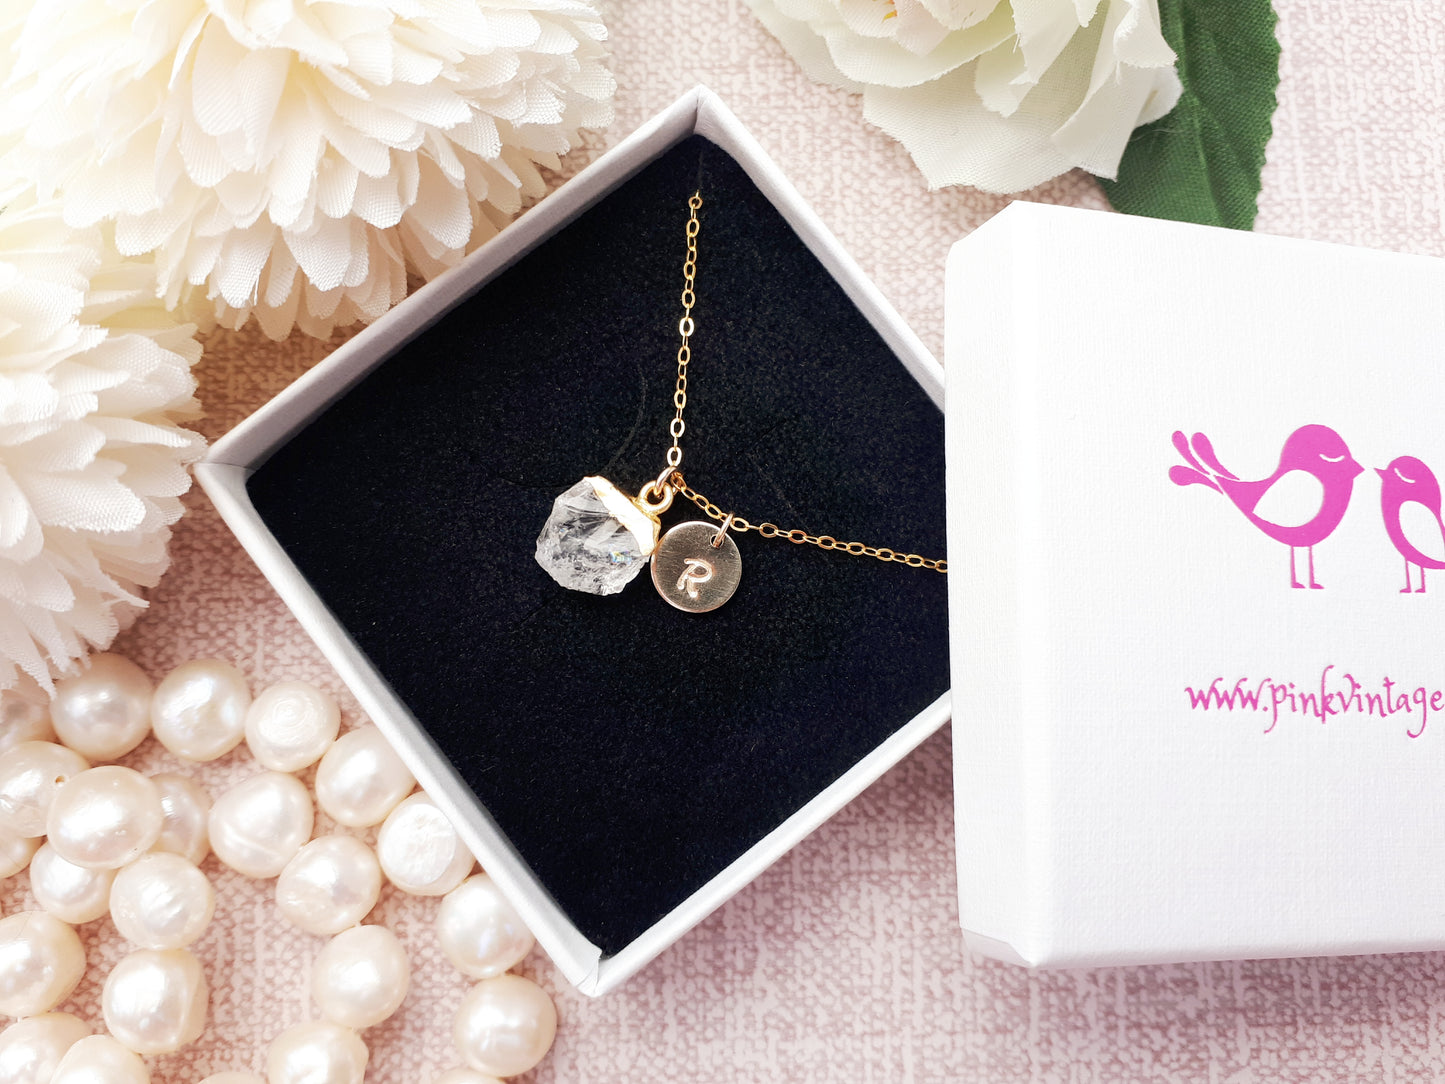 Personalised clear quartz necklace in gold.